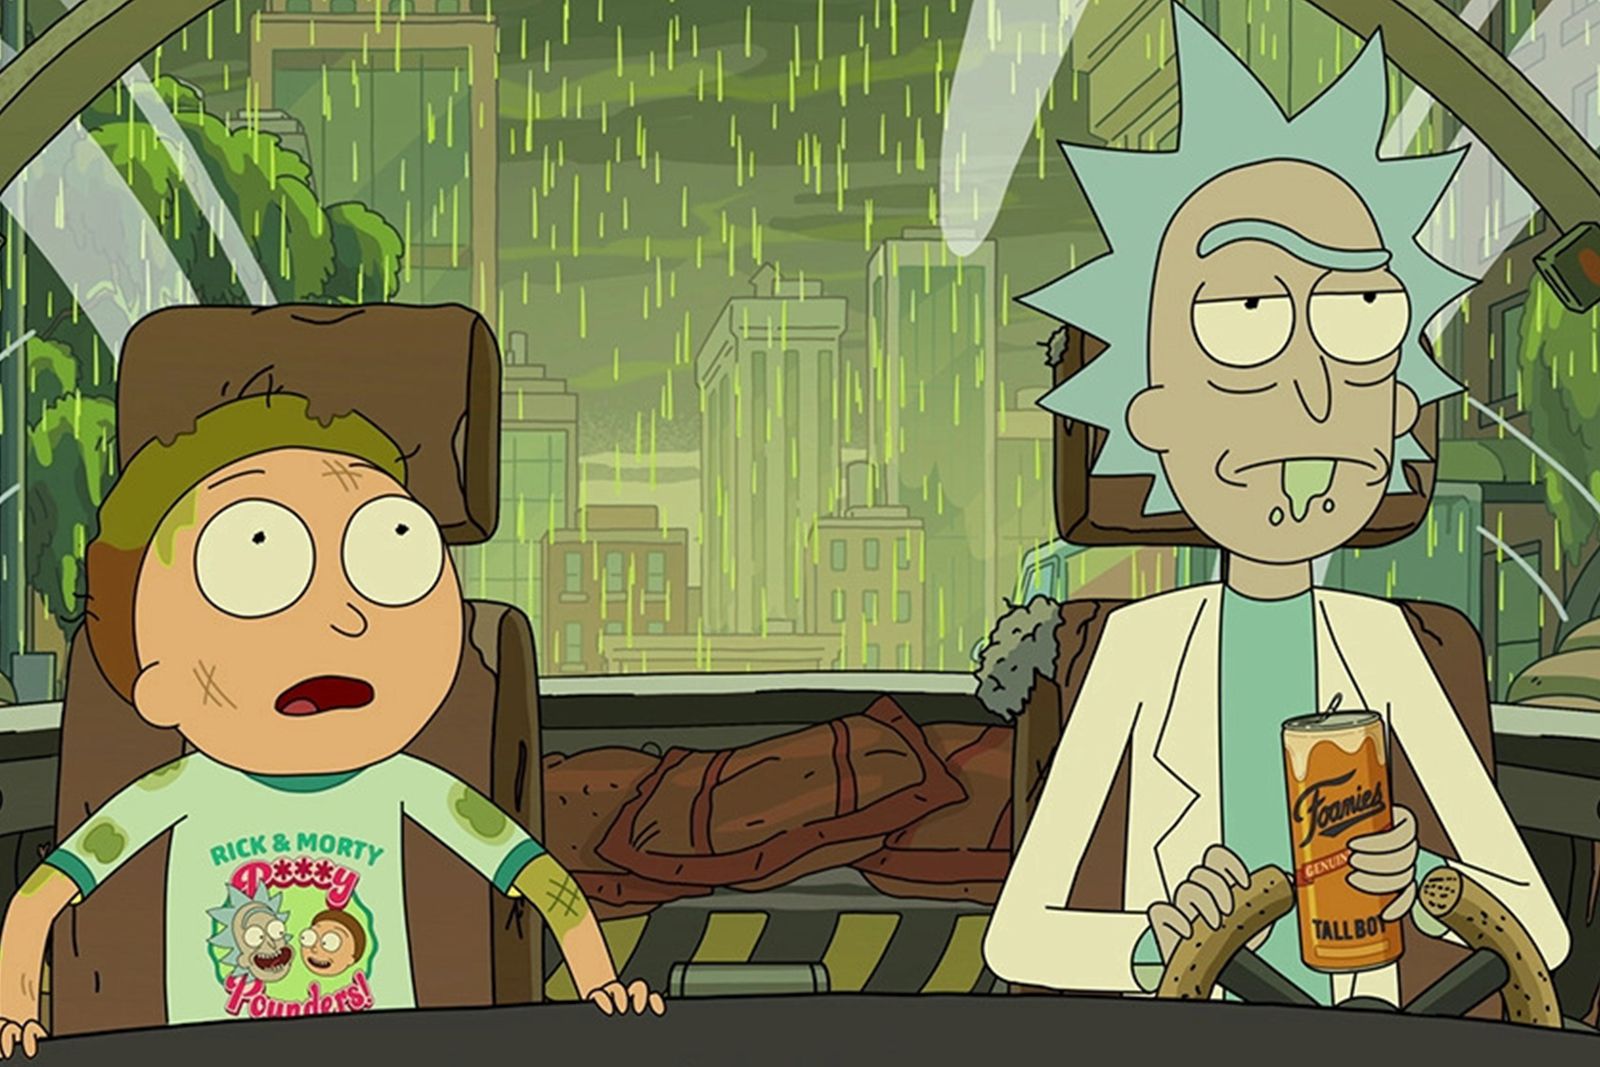 Rick and Morty screen capture